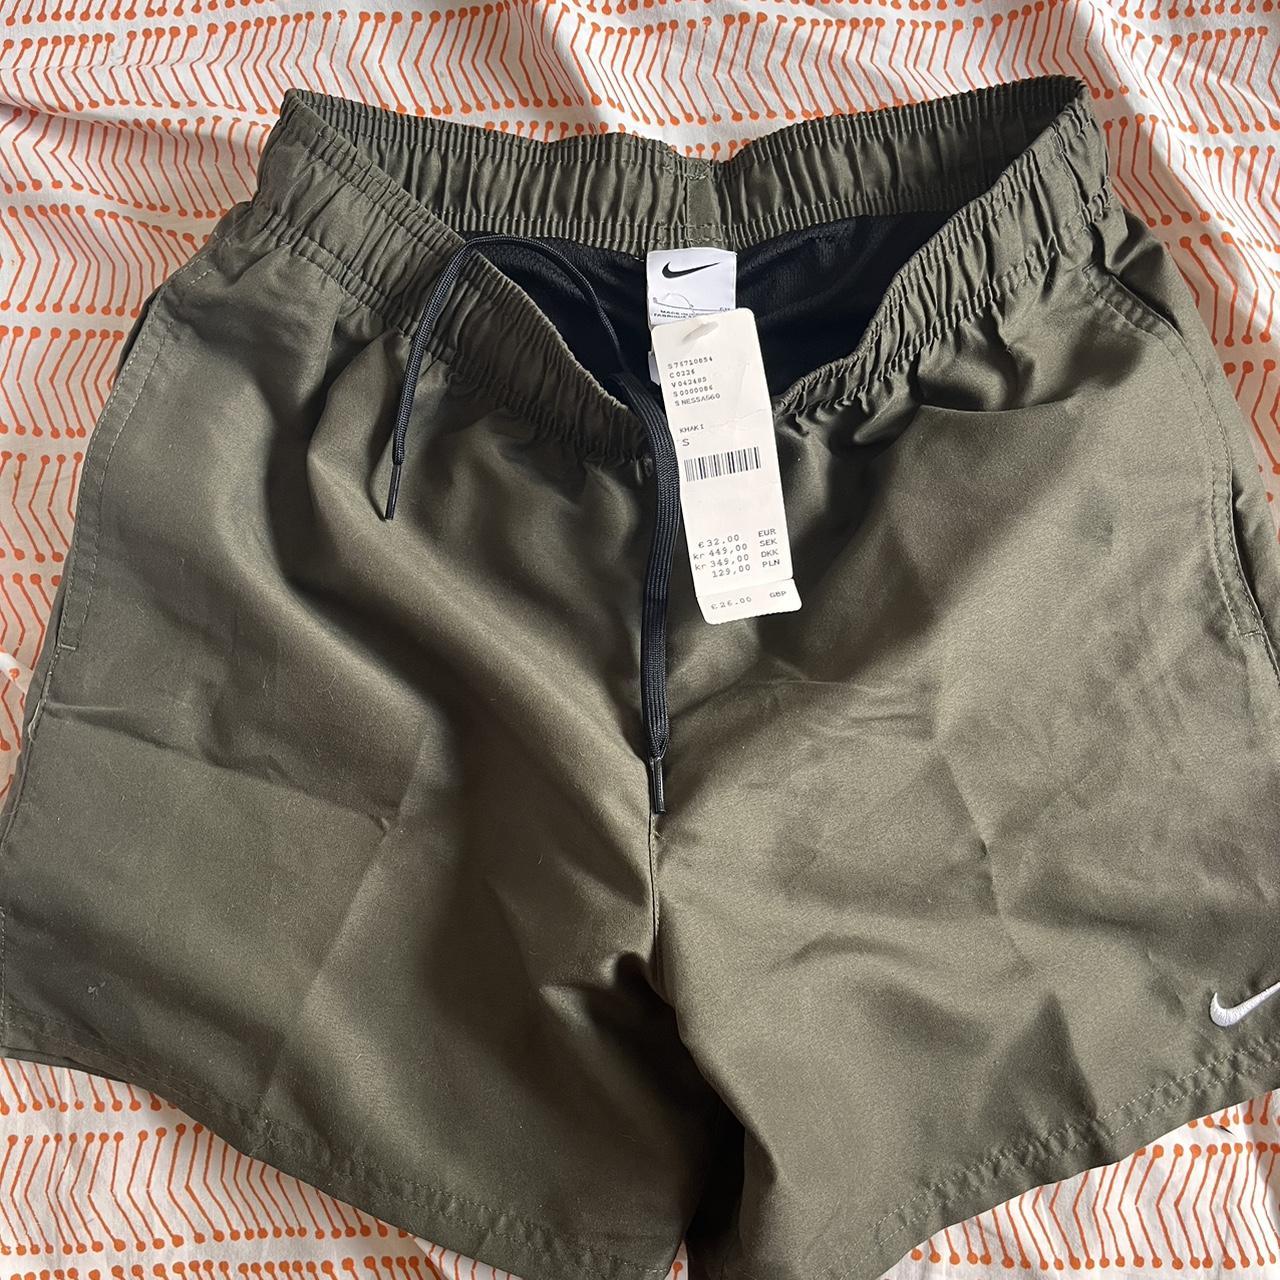 Khaki urban outfitters Nike shorts🍃 Never worn with... - Depop